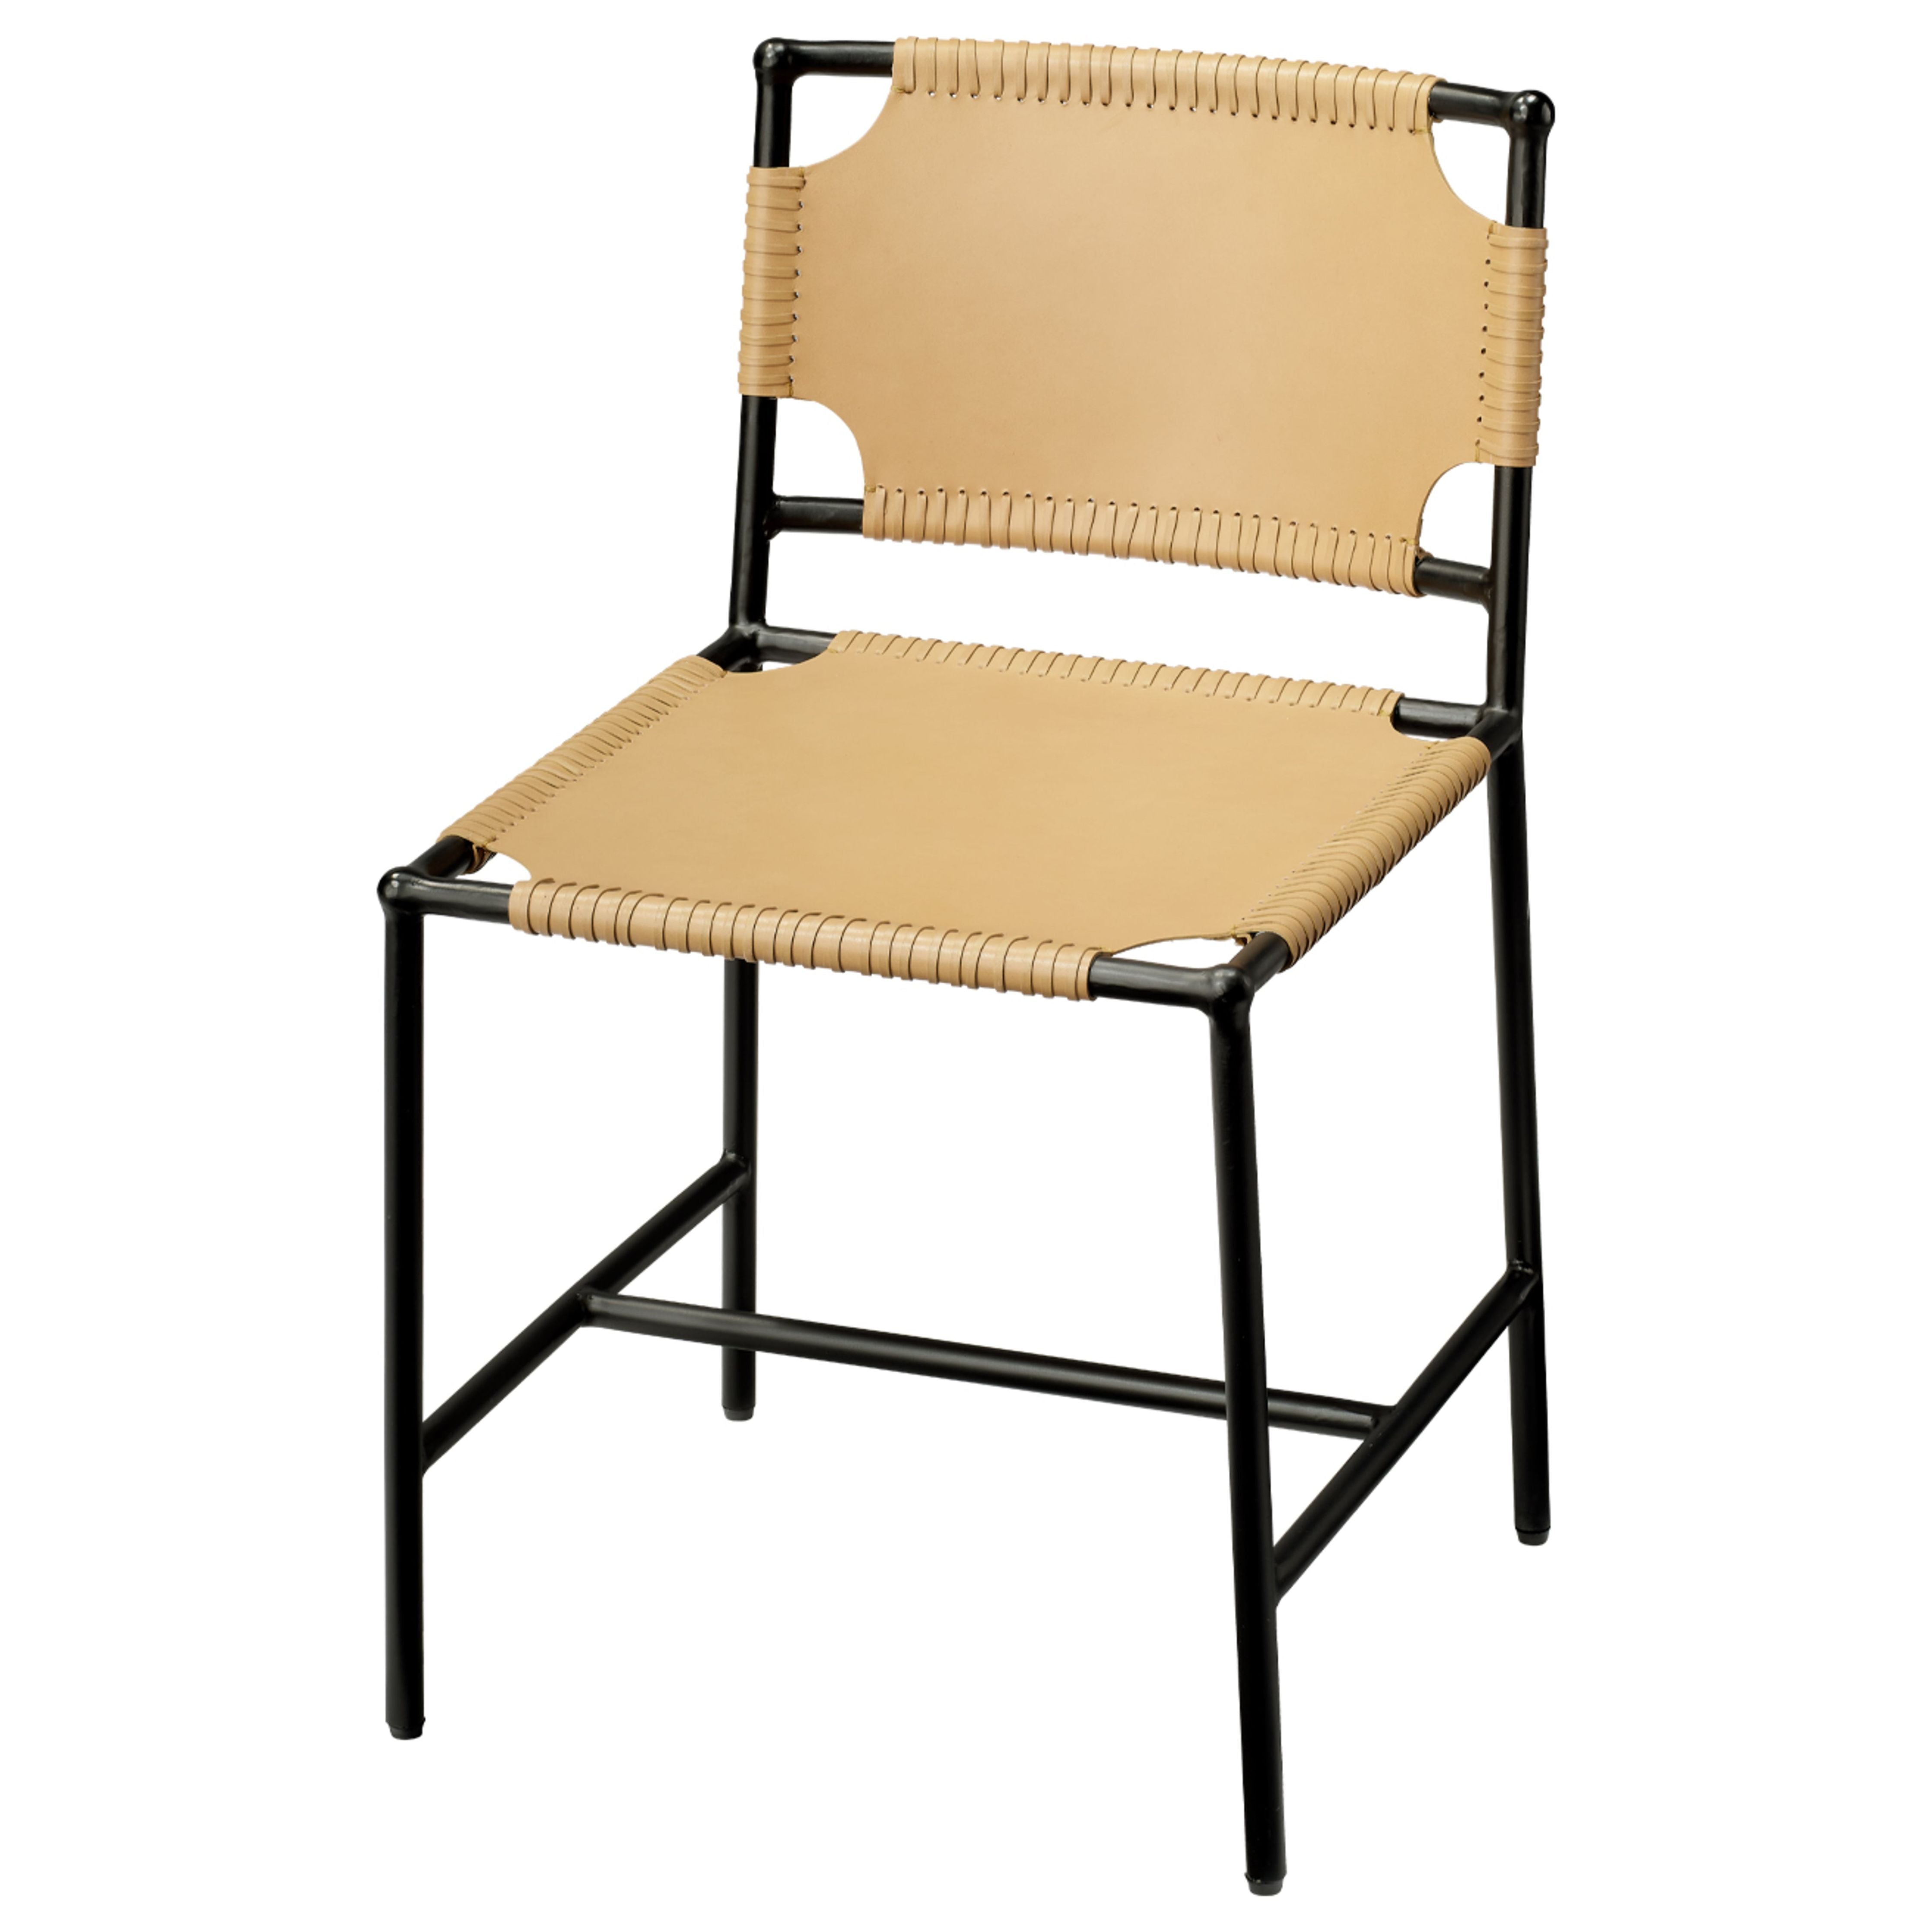 Jamie Young Company - 20ASHE-DCCA - Asher Dining Chair - Asher - Cashew